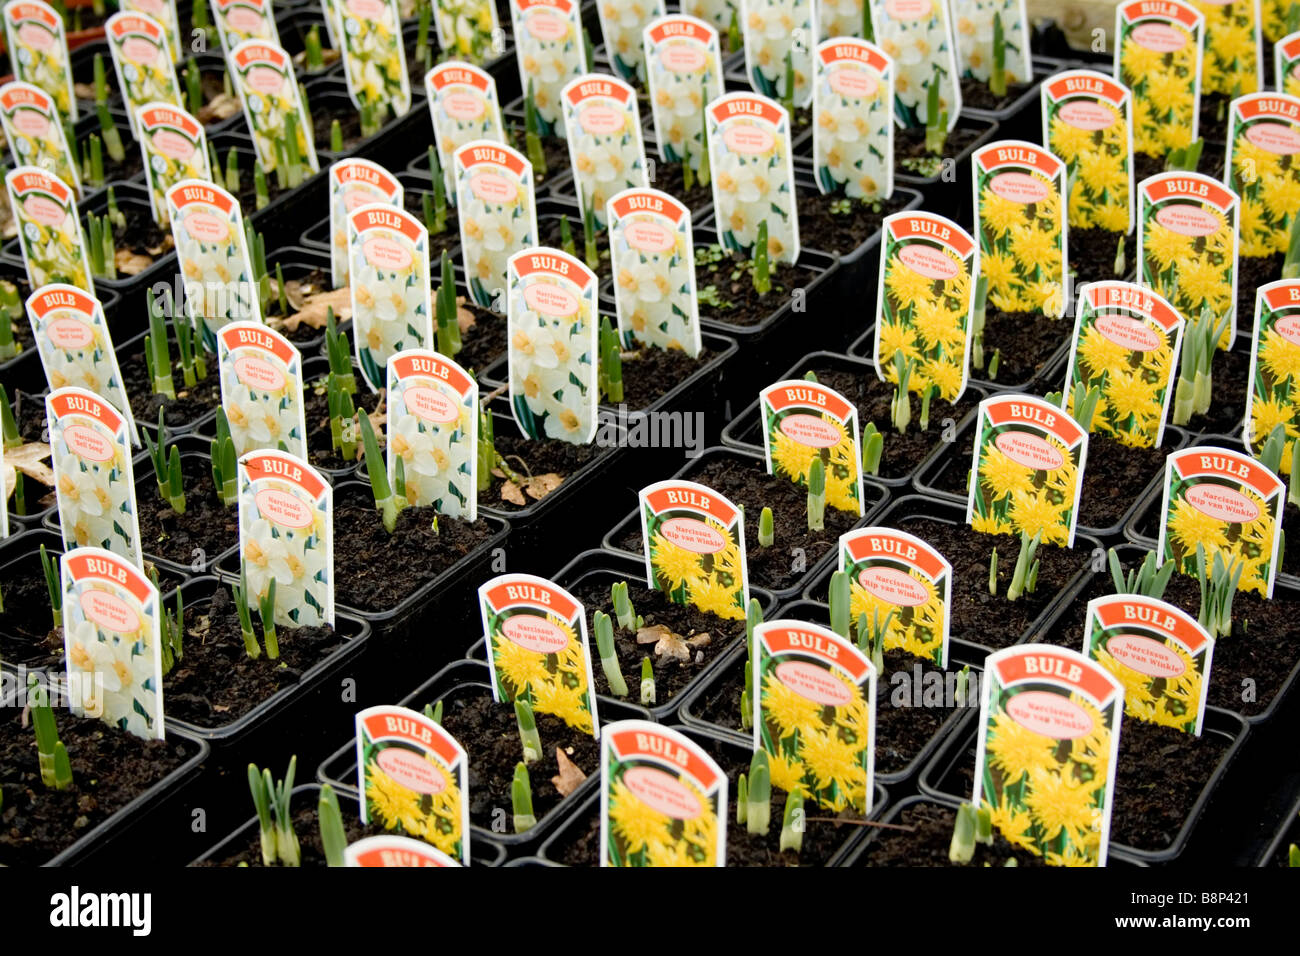 Rows of young Daffodil plants in pots, in a nursery / garden centre, all ready for sale and to be planted out. Stock Photo